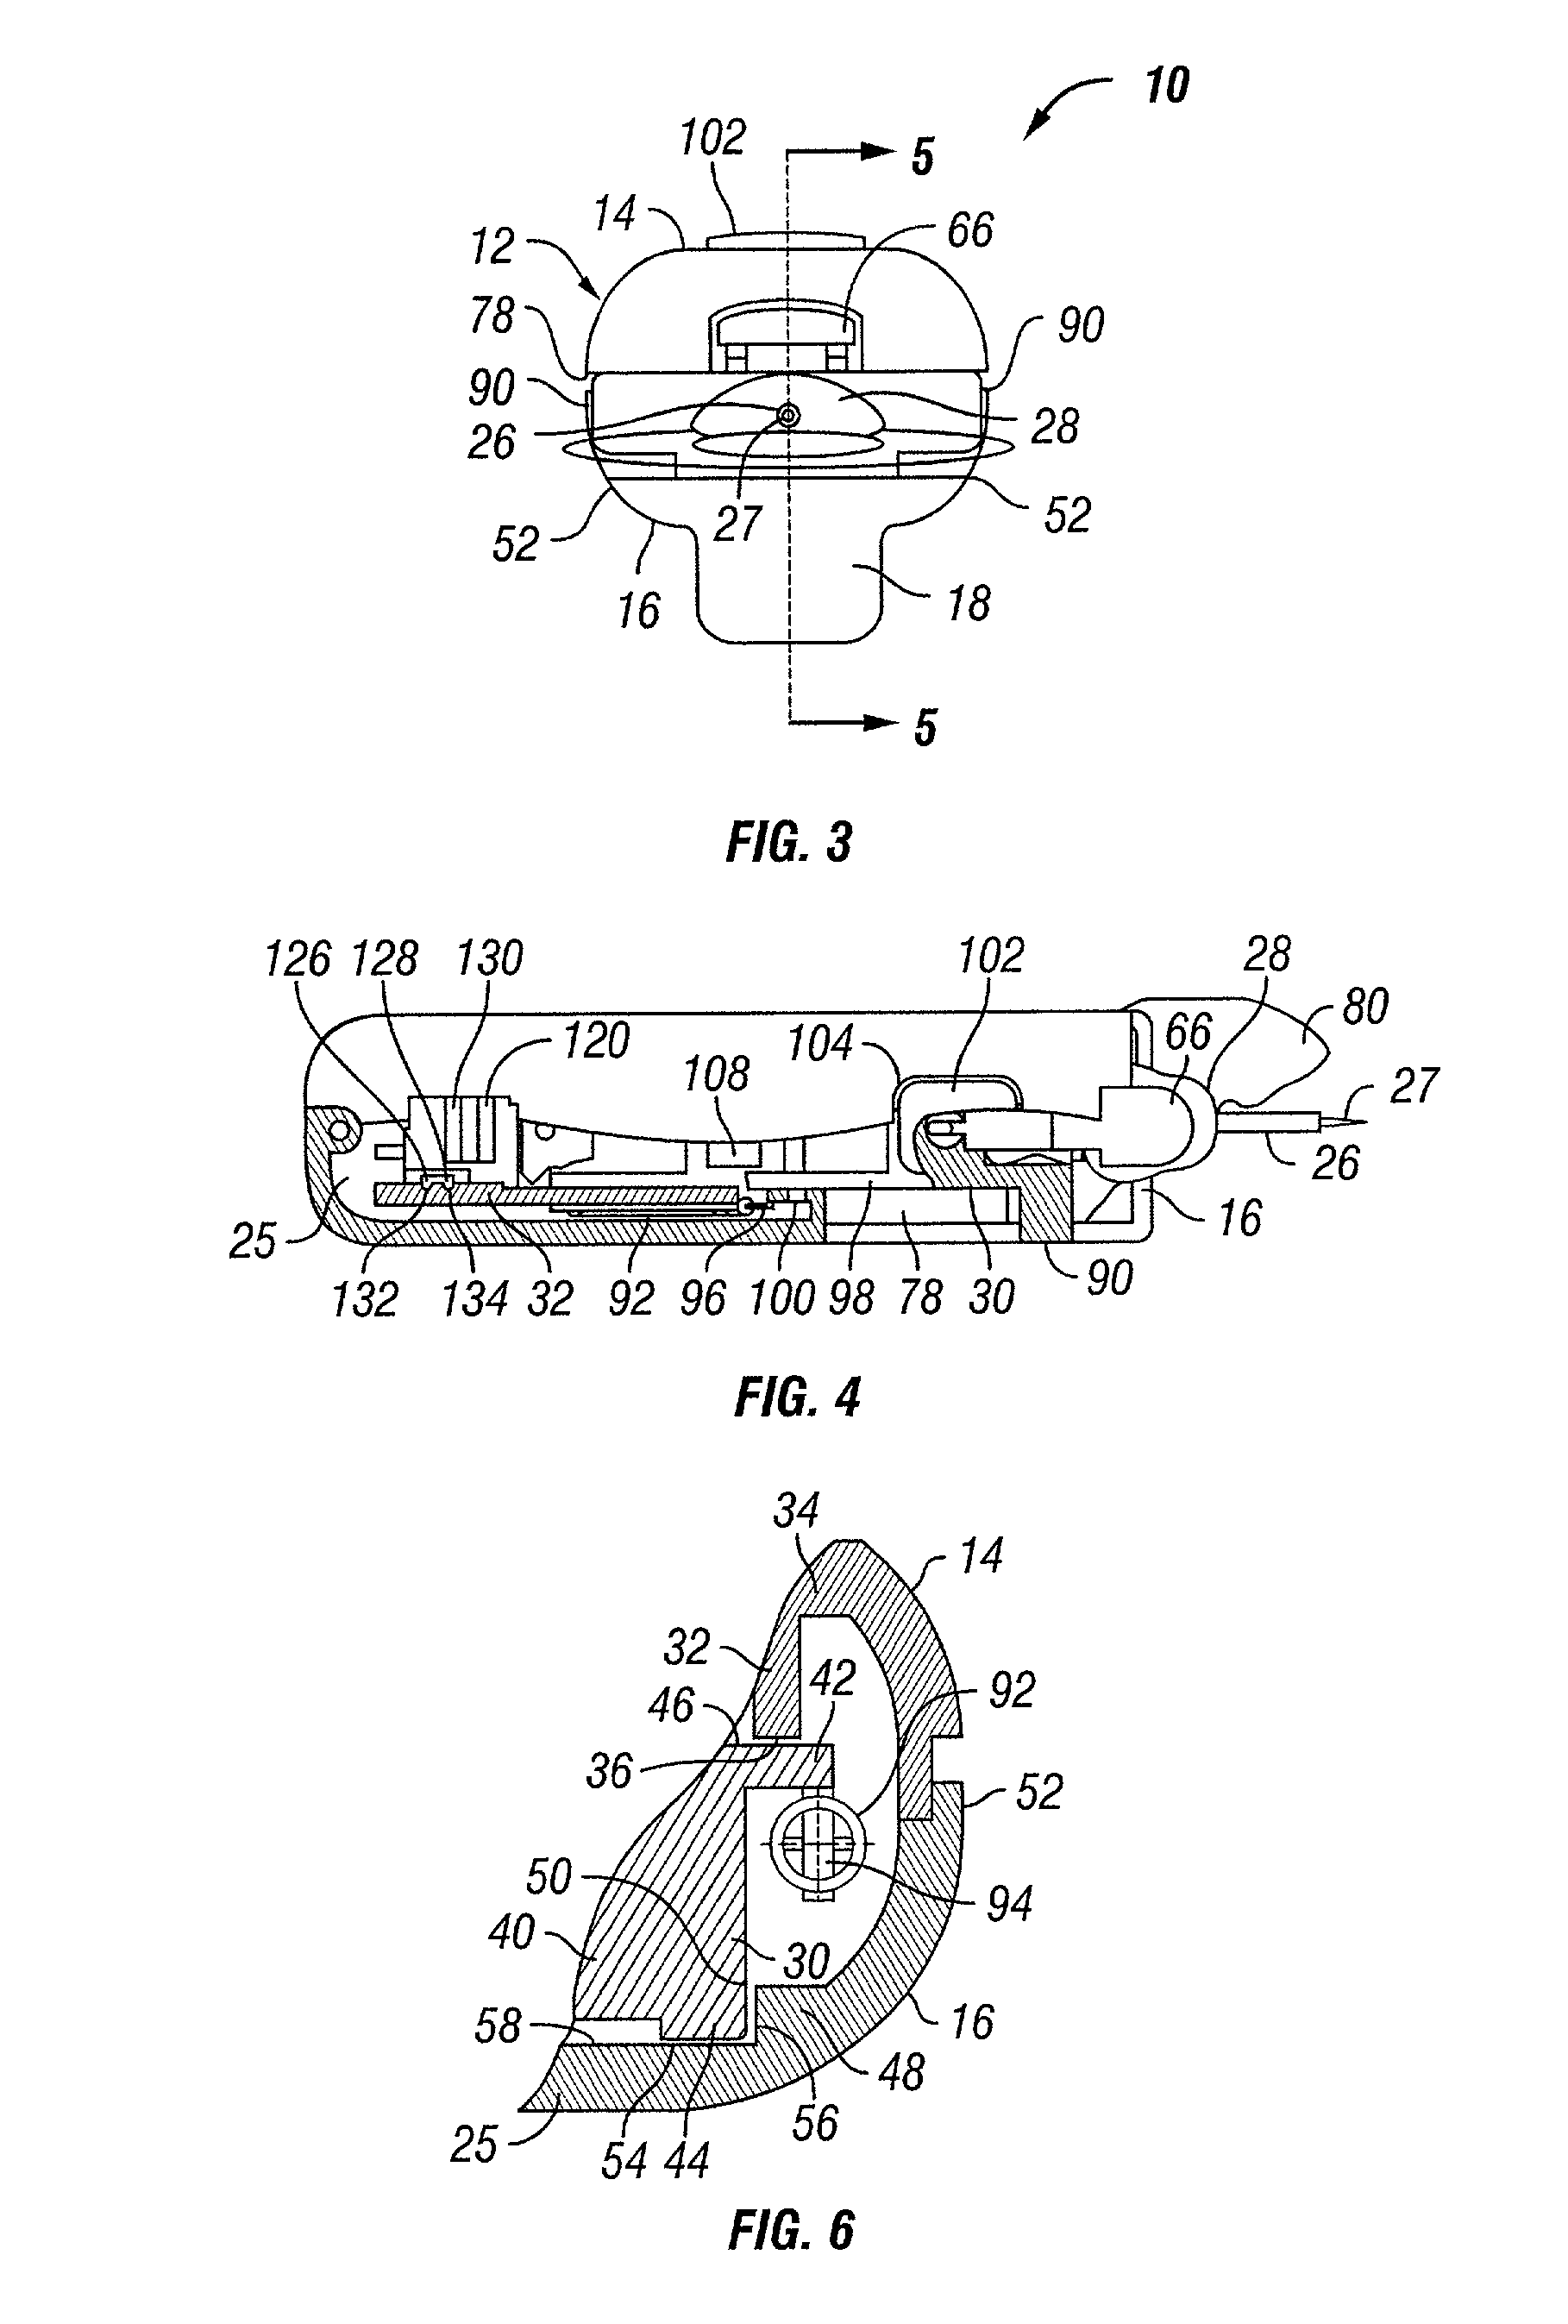 Transcutaneous inserter for low-profile infusion sets